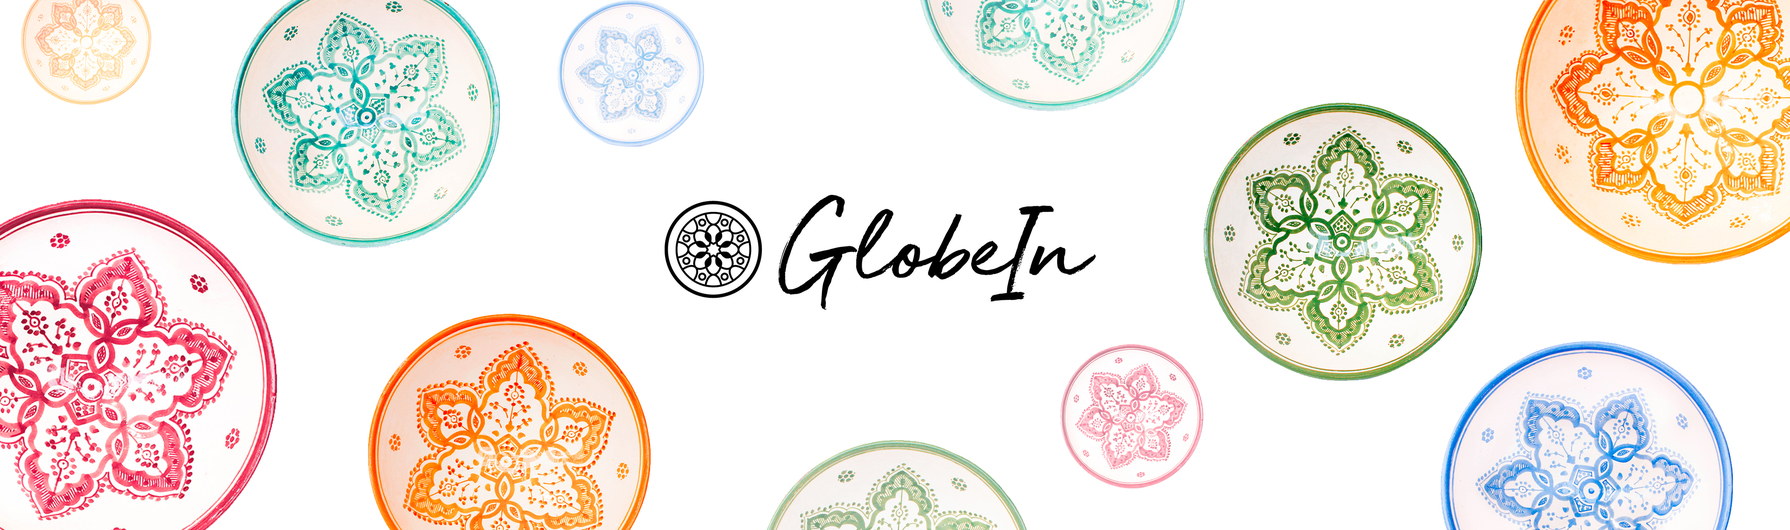 GlobeIn Giving Tuesday Sale – Buy One Artisan Box, Get One FREE!